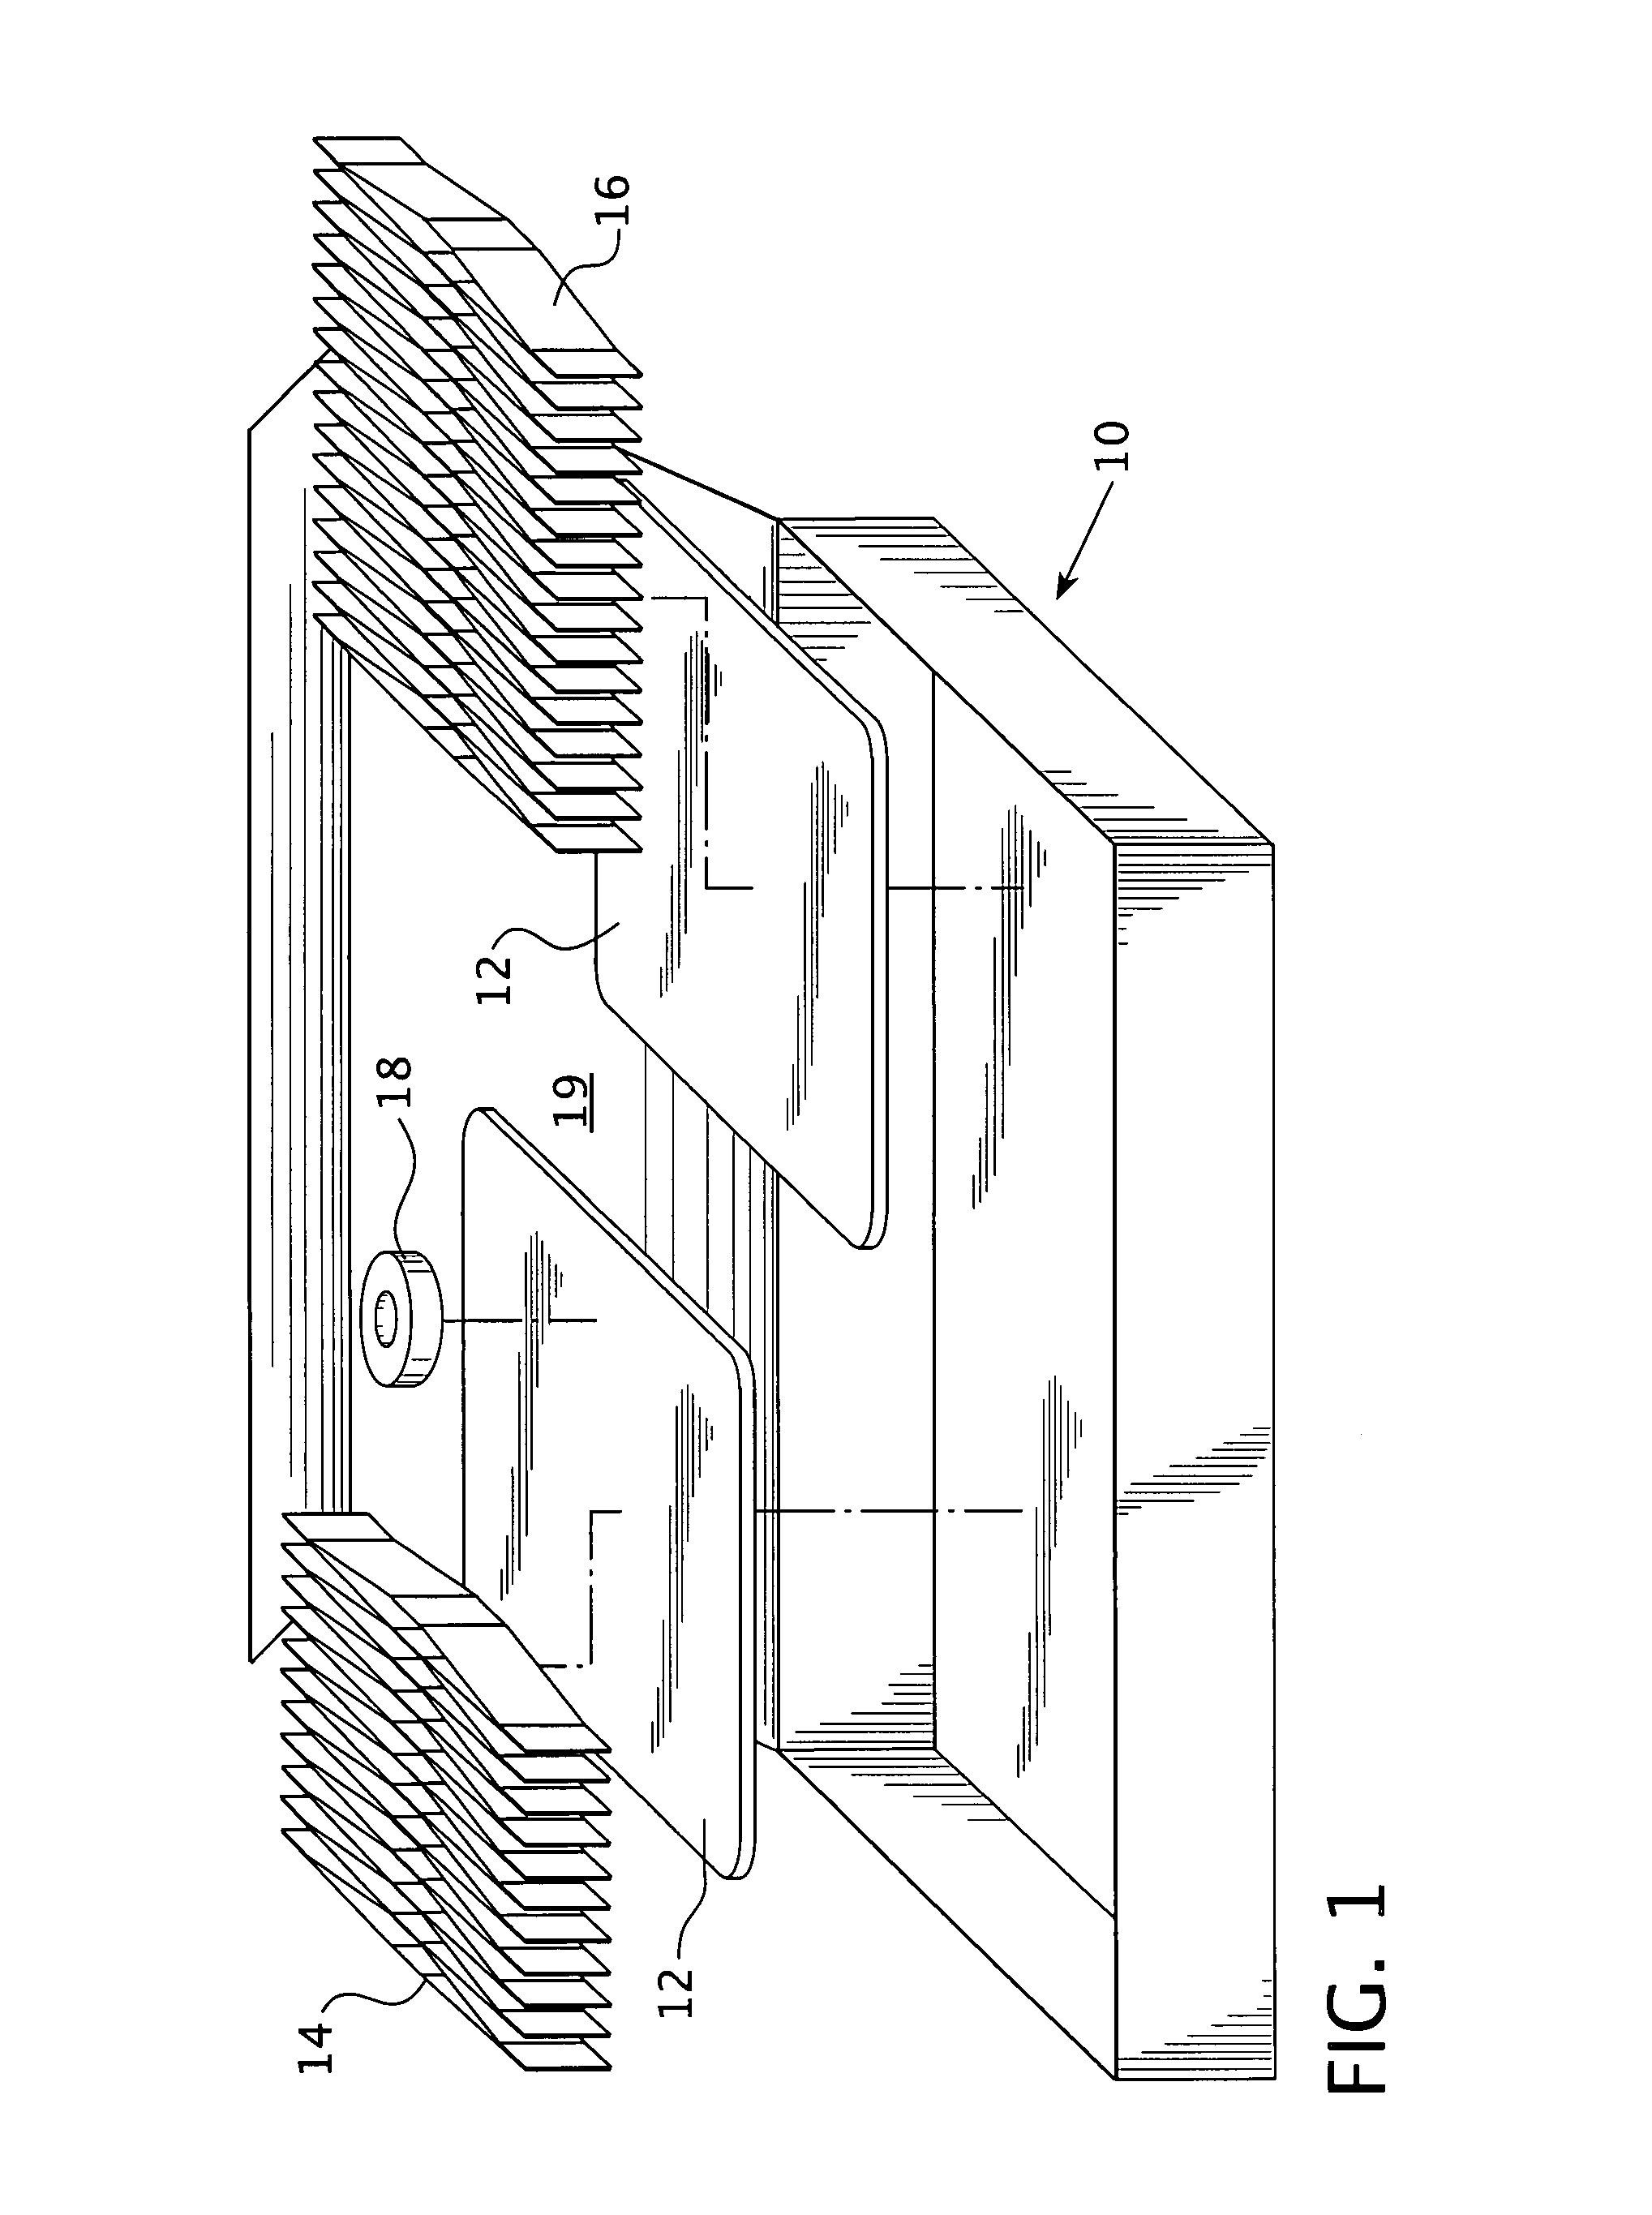 Method for securing an automatic washer for shipping